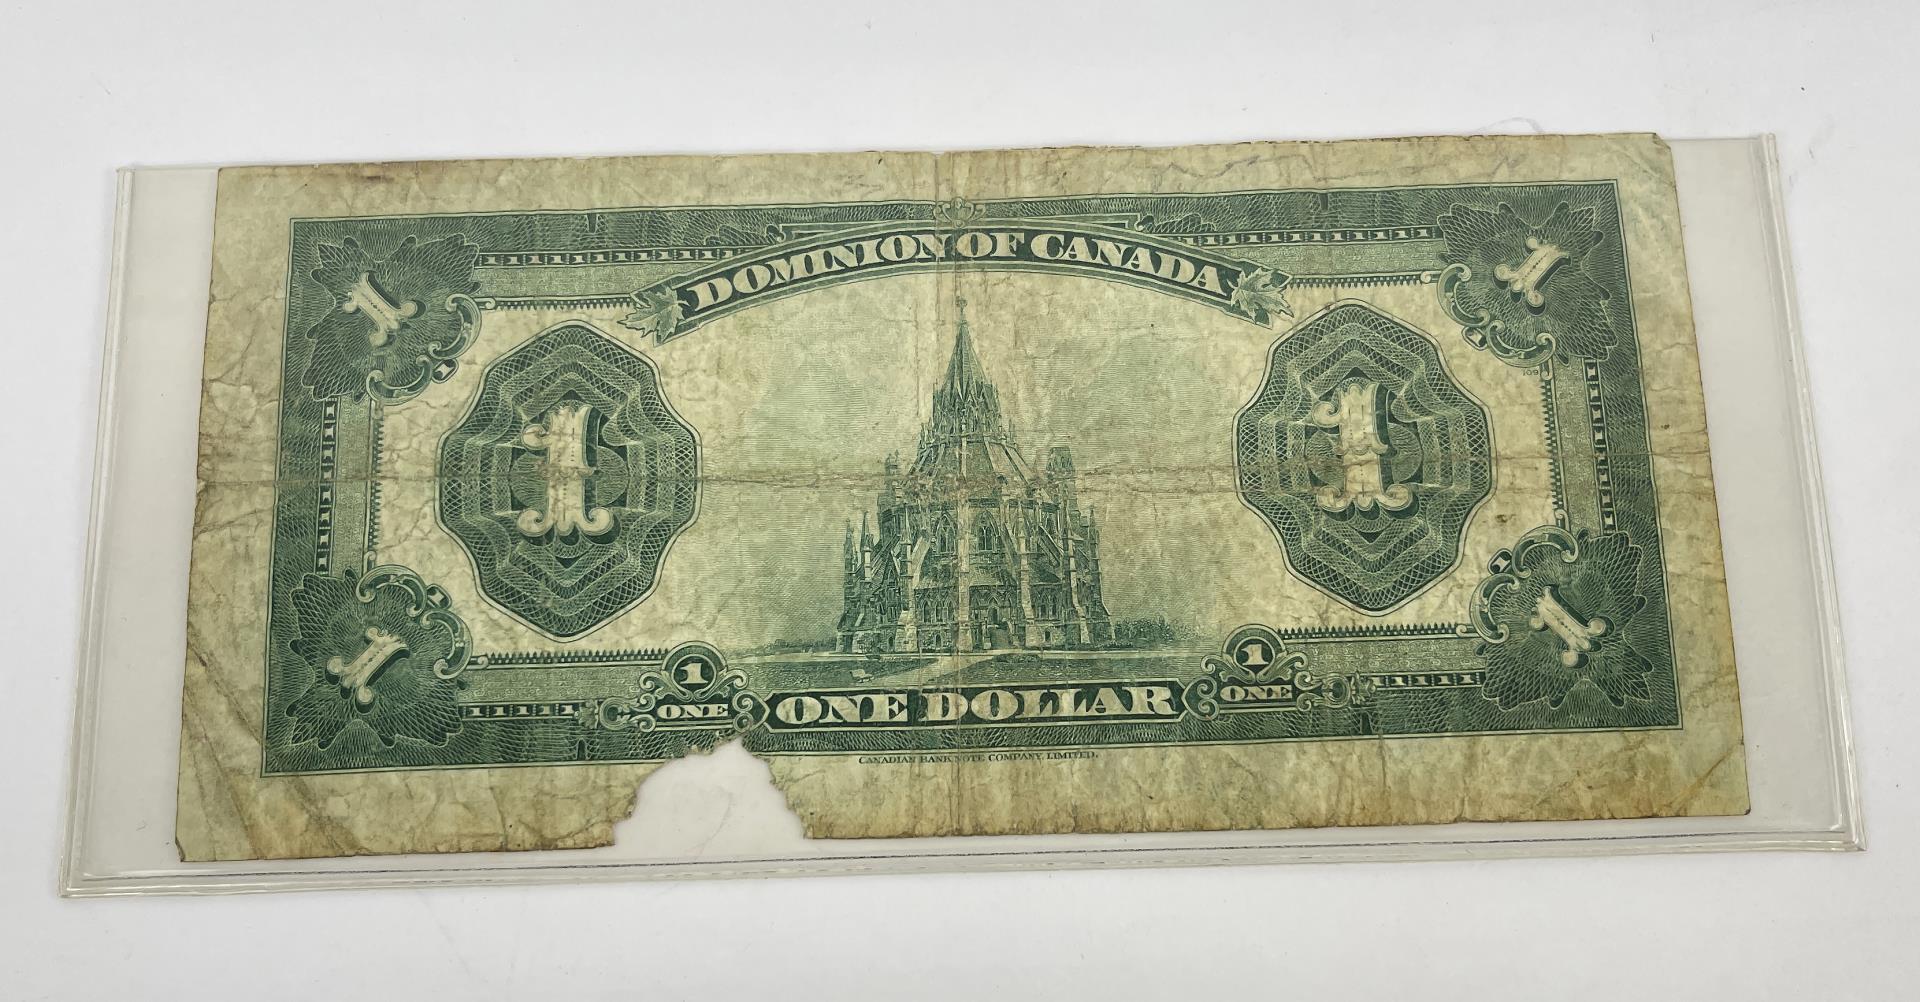 1923 Dominion Bank of Canada $1 Note